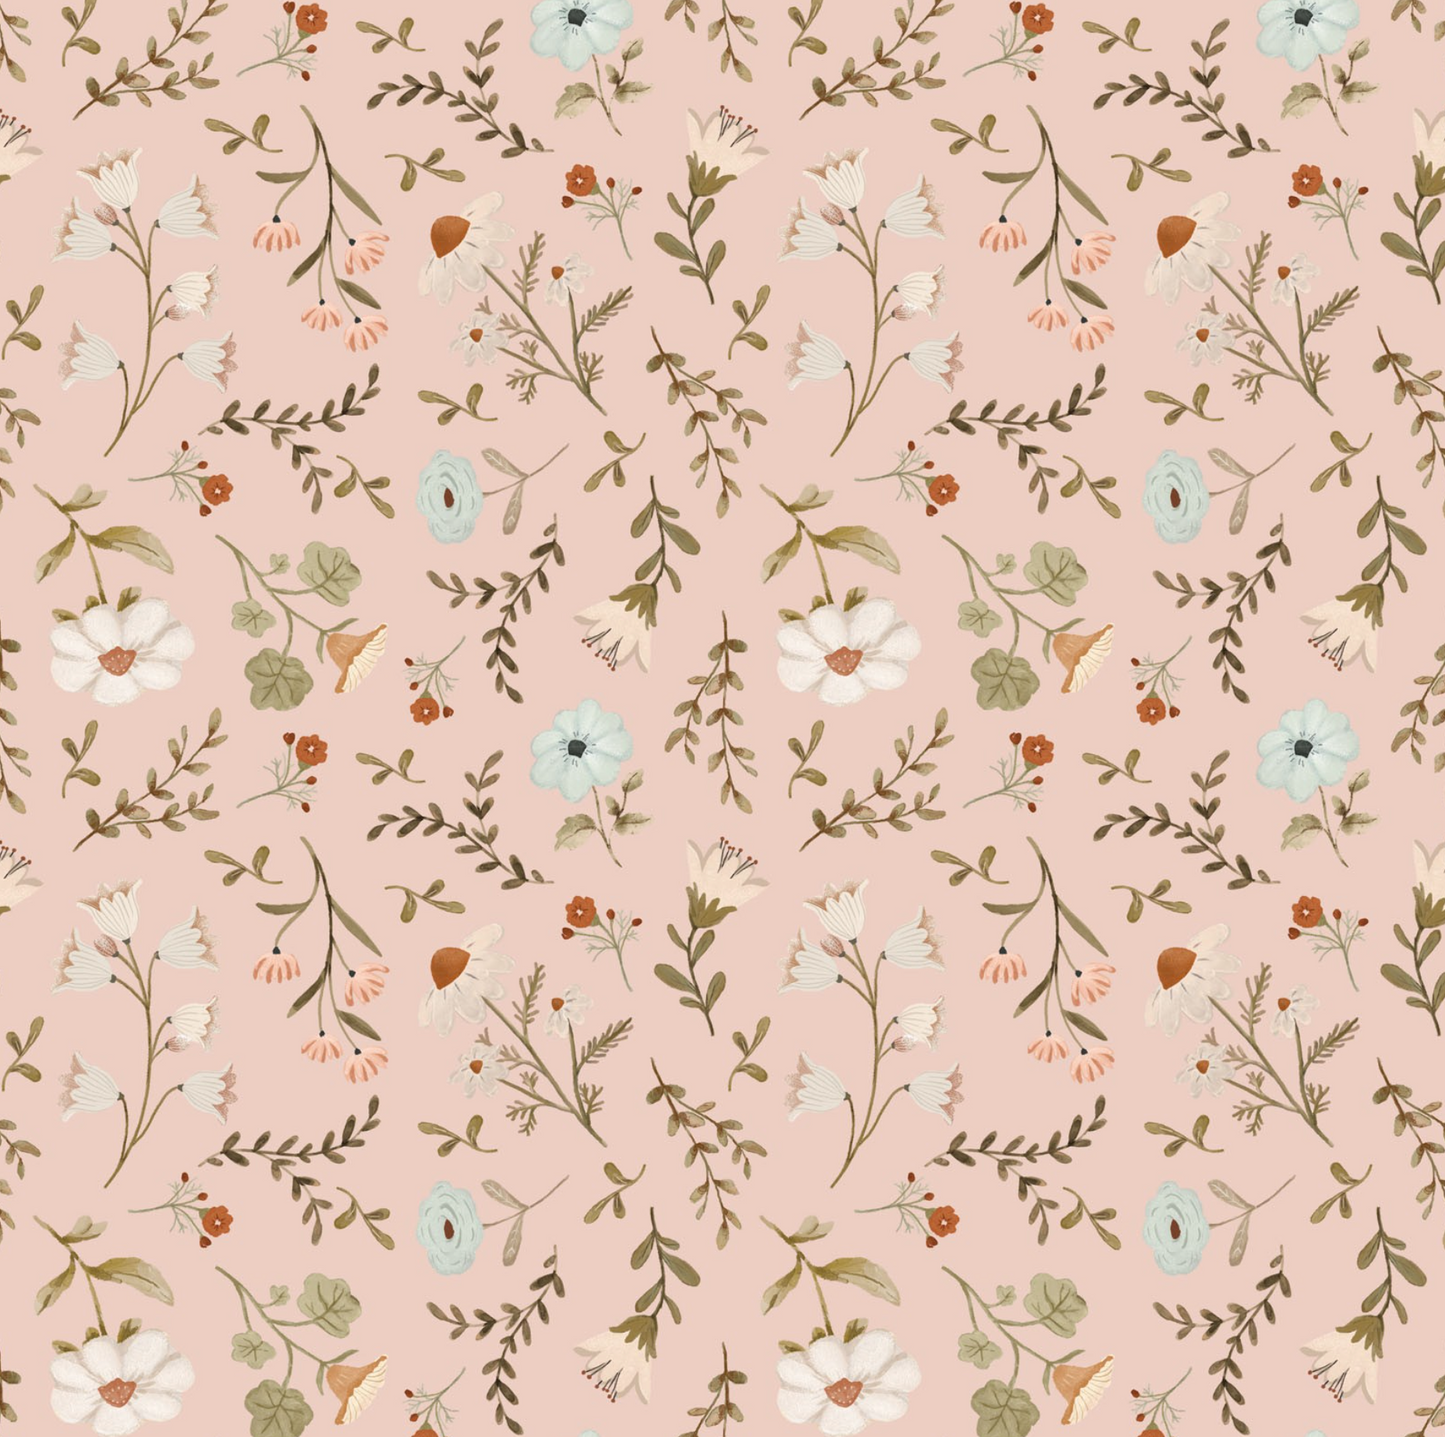 House and Home, HH22153 Meagan Blush, sold by the 1/2 yard